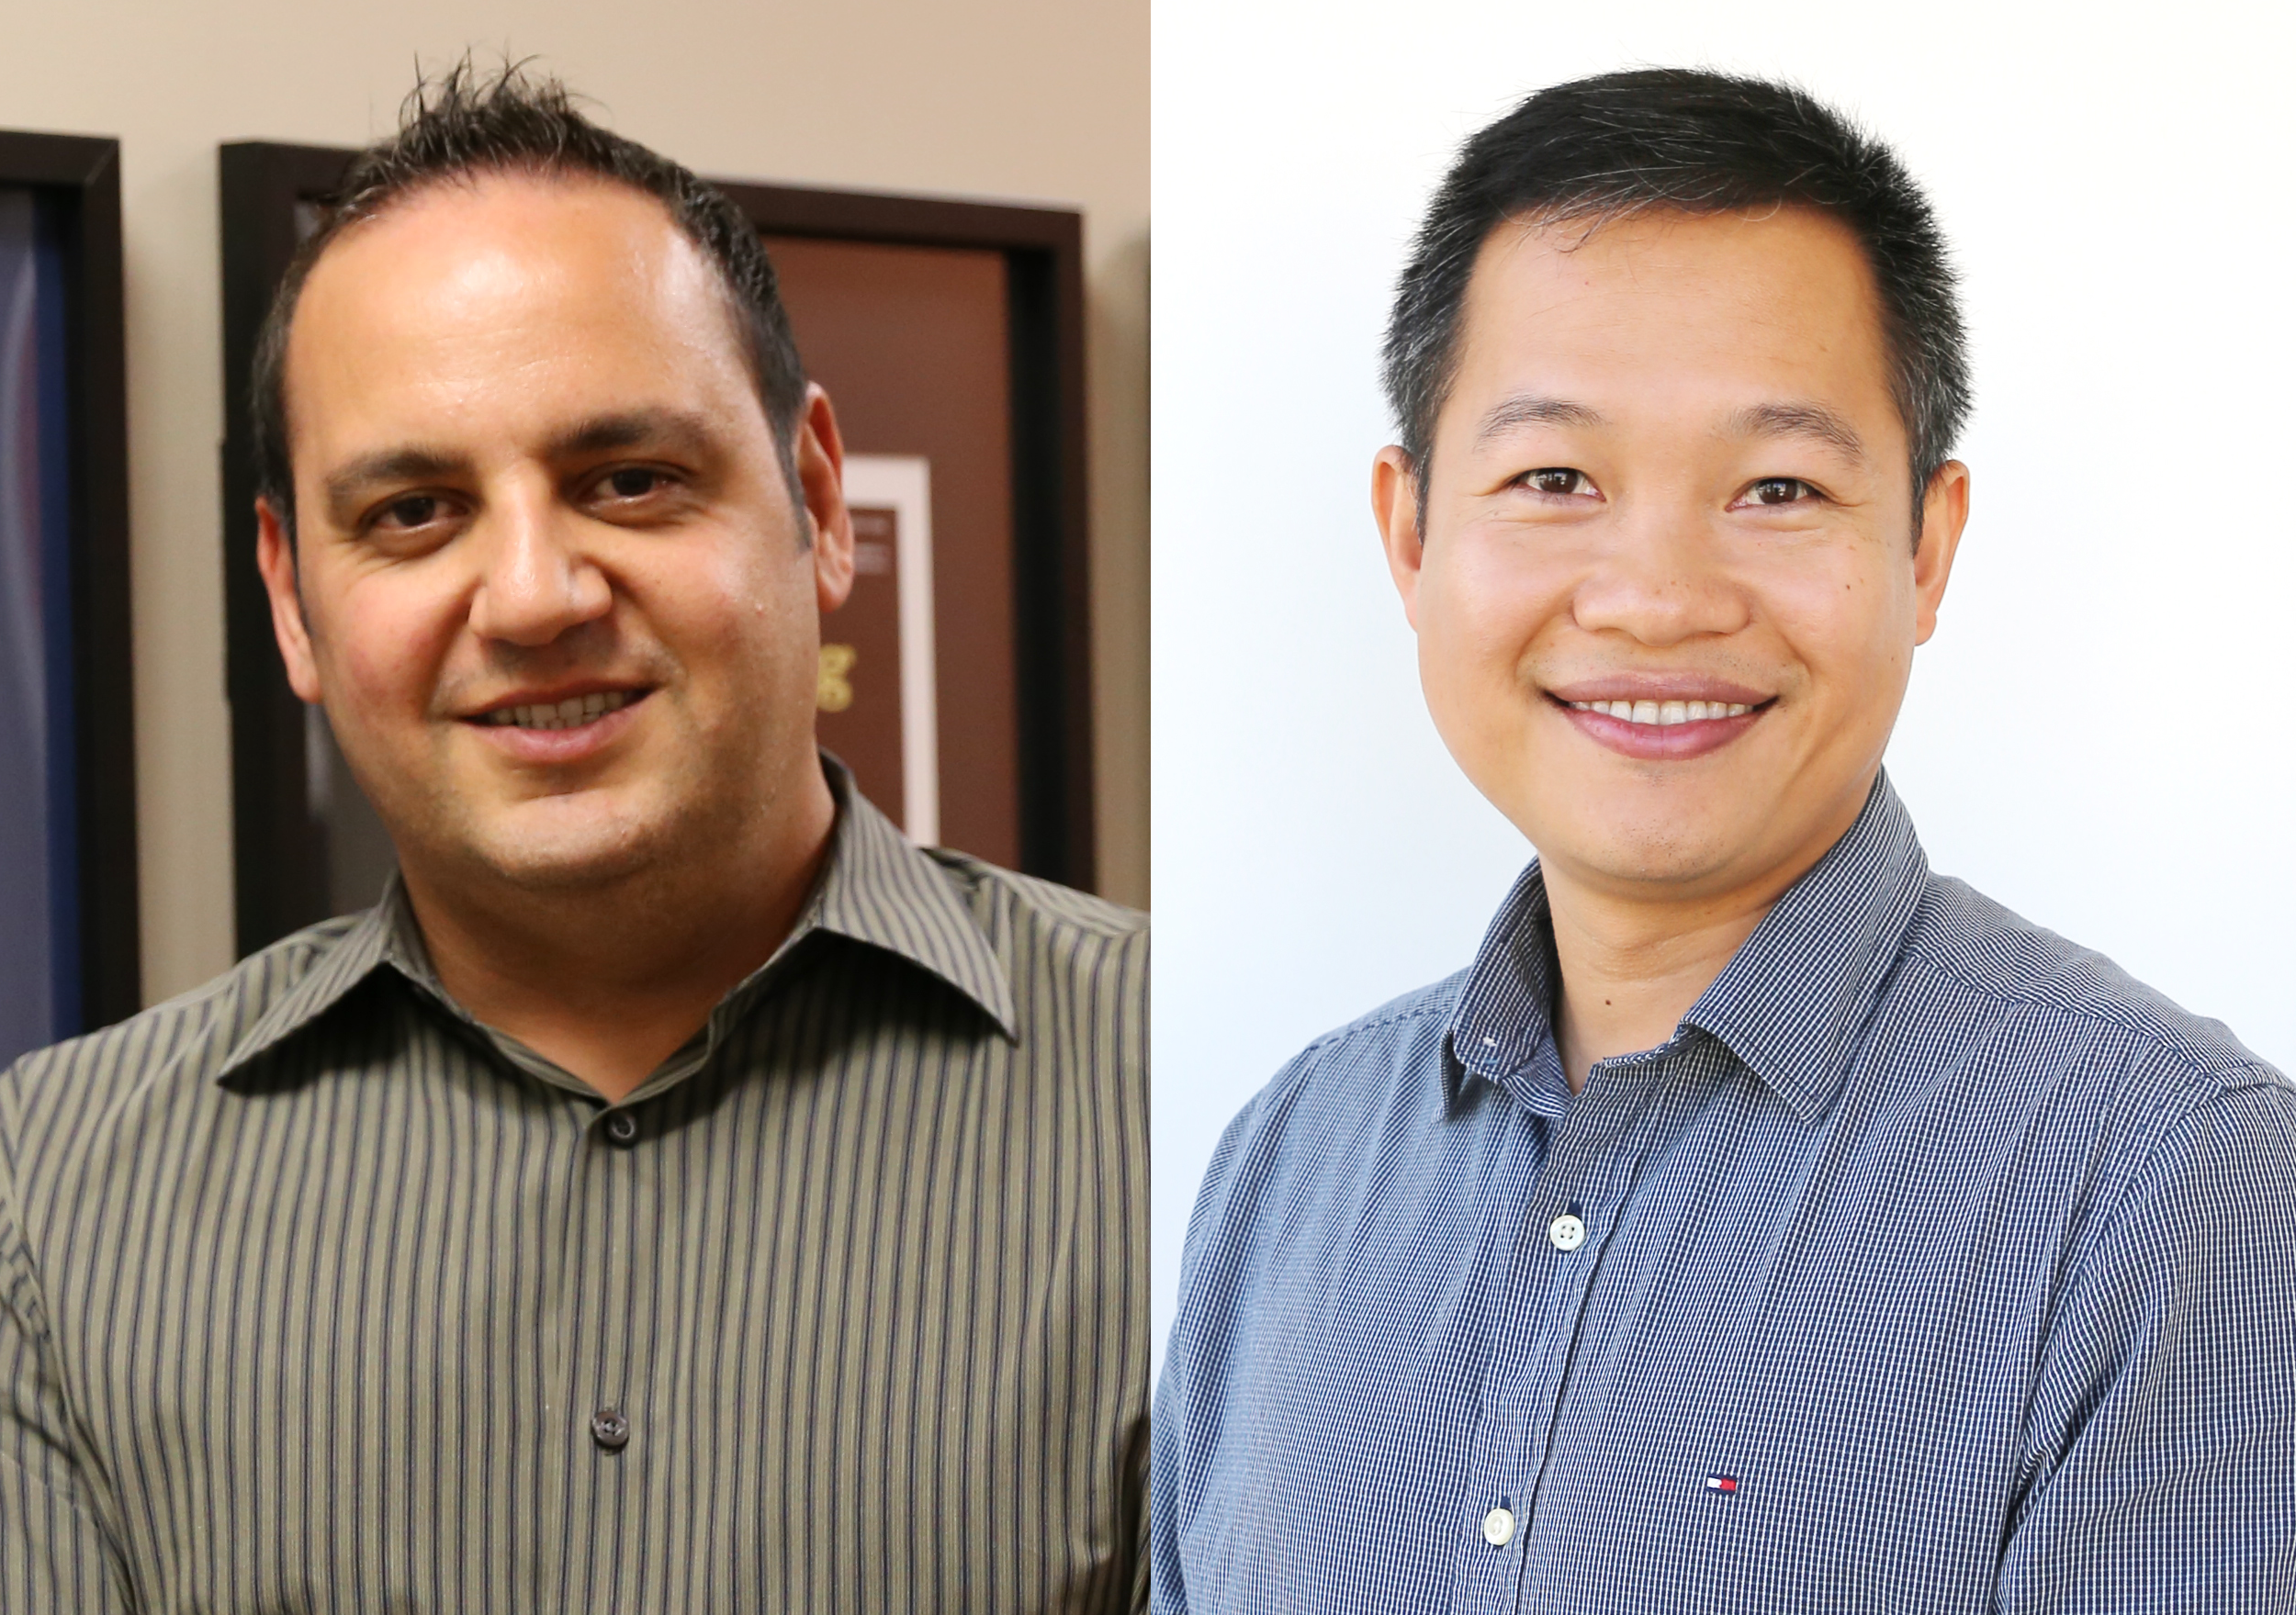 Arash Kheradvar (left)  and Hung Cao each won a POP grant from UCI Beall Applied Innovation in support of their commercially promising technology.